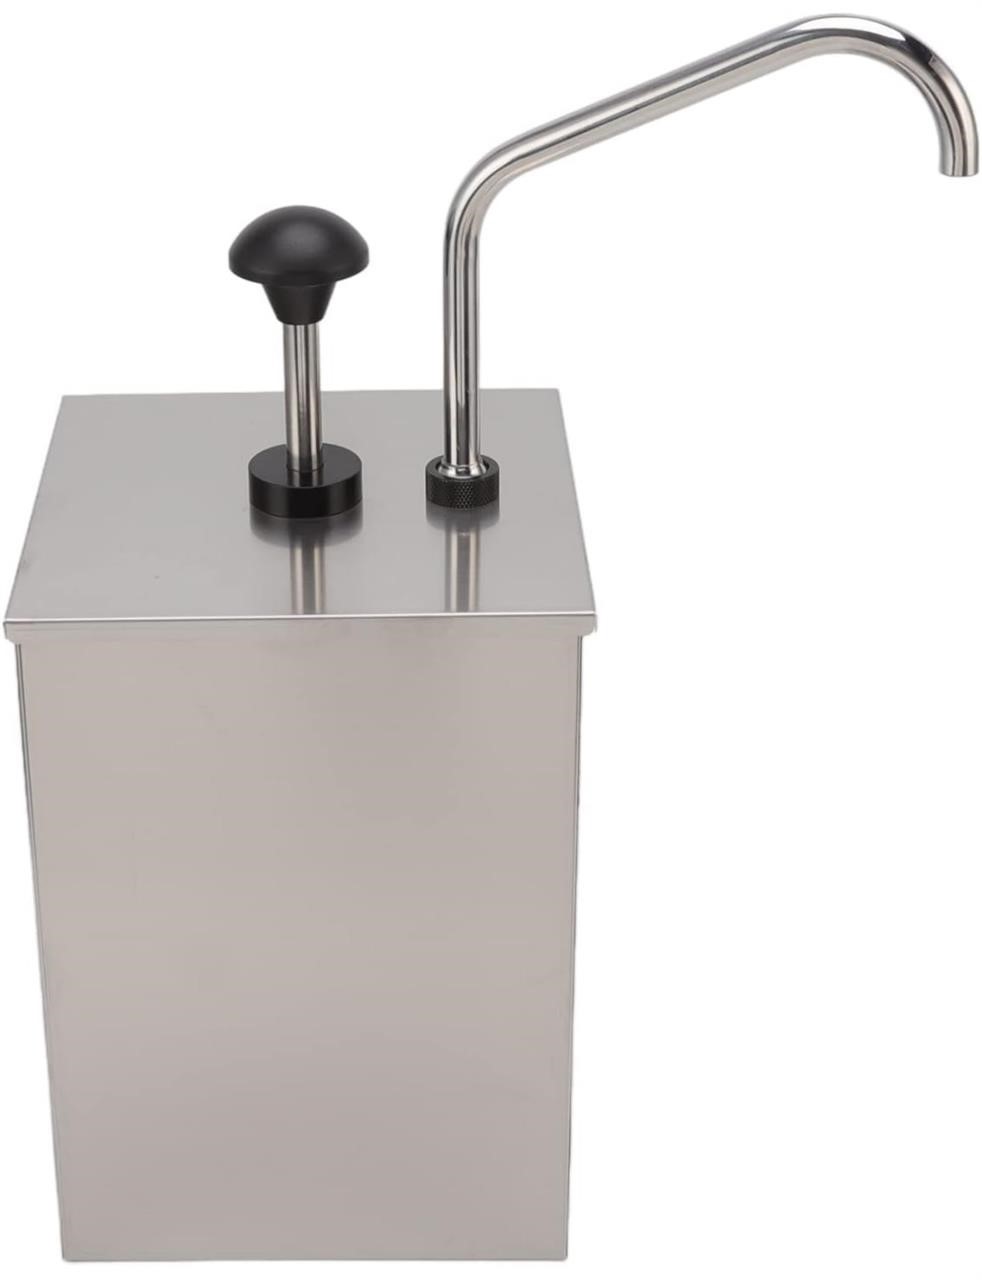 ($166) Soy Sauce Pump Dispenser, Stainless